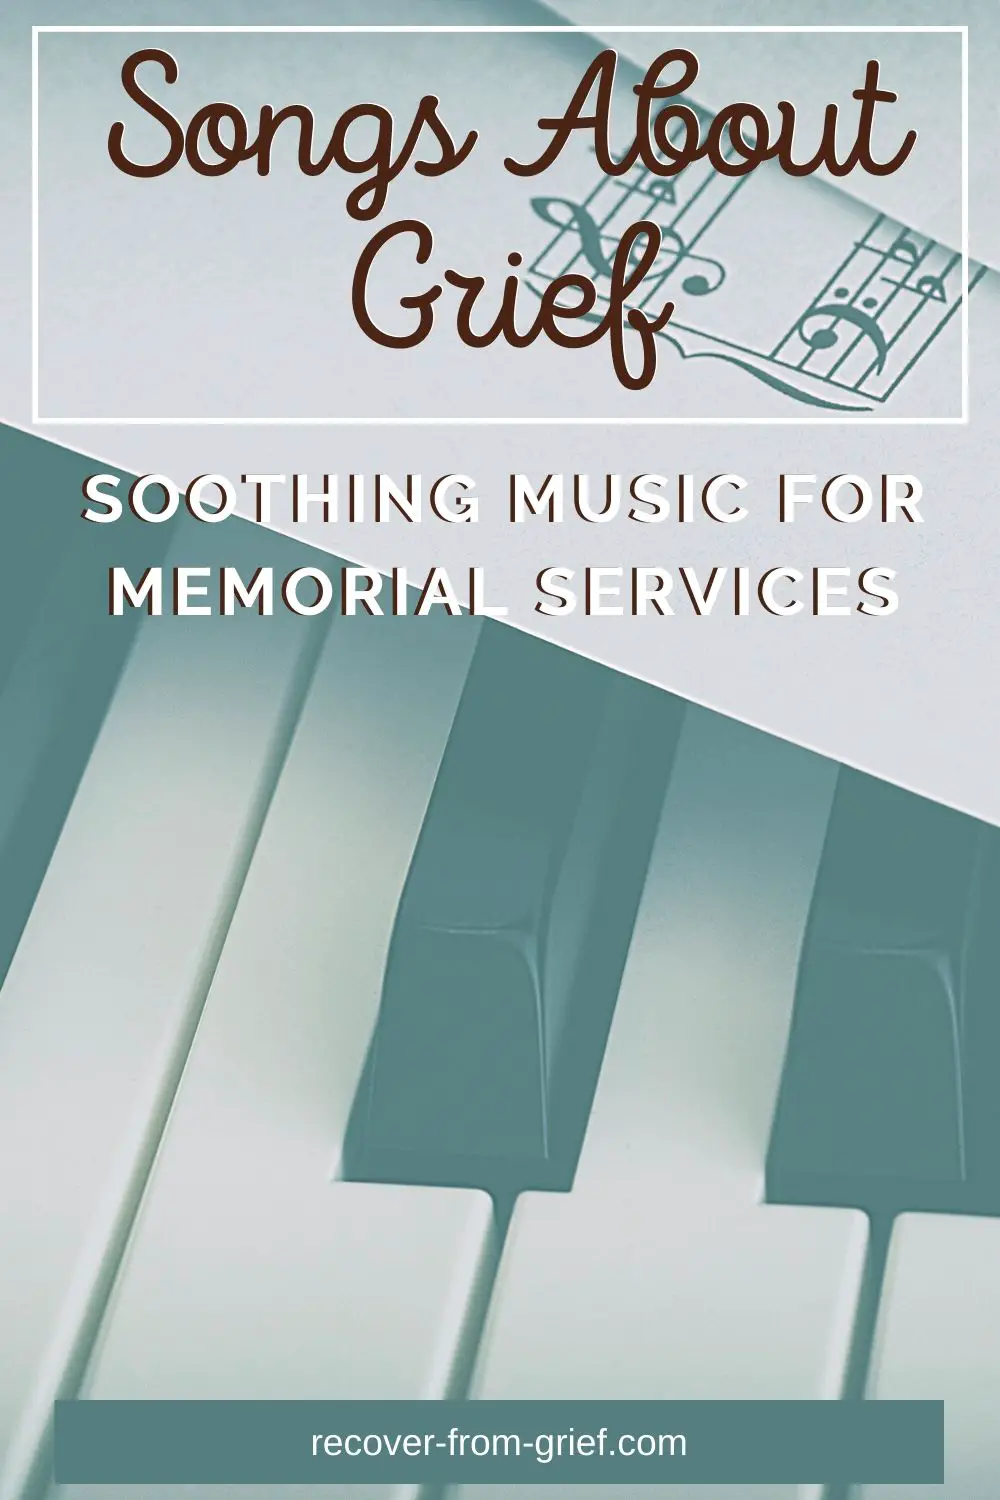 Songs about grief